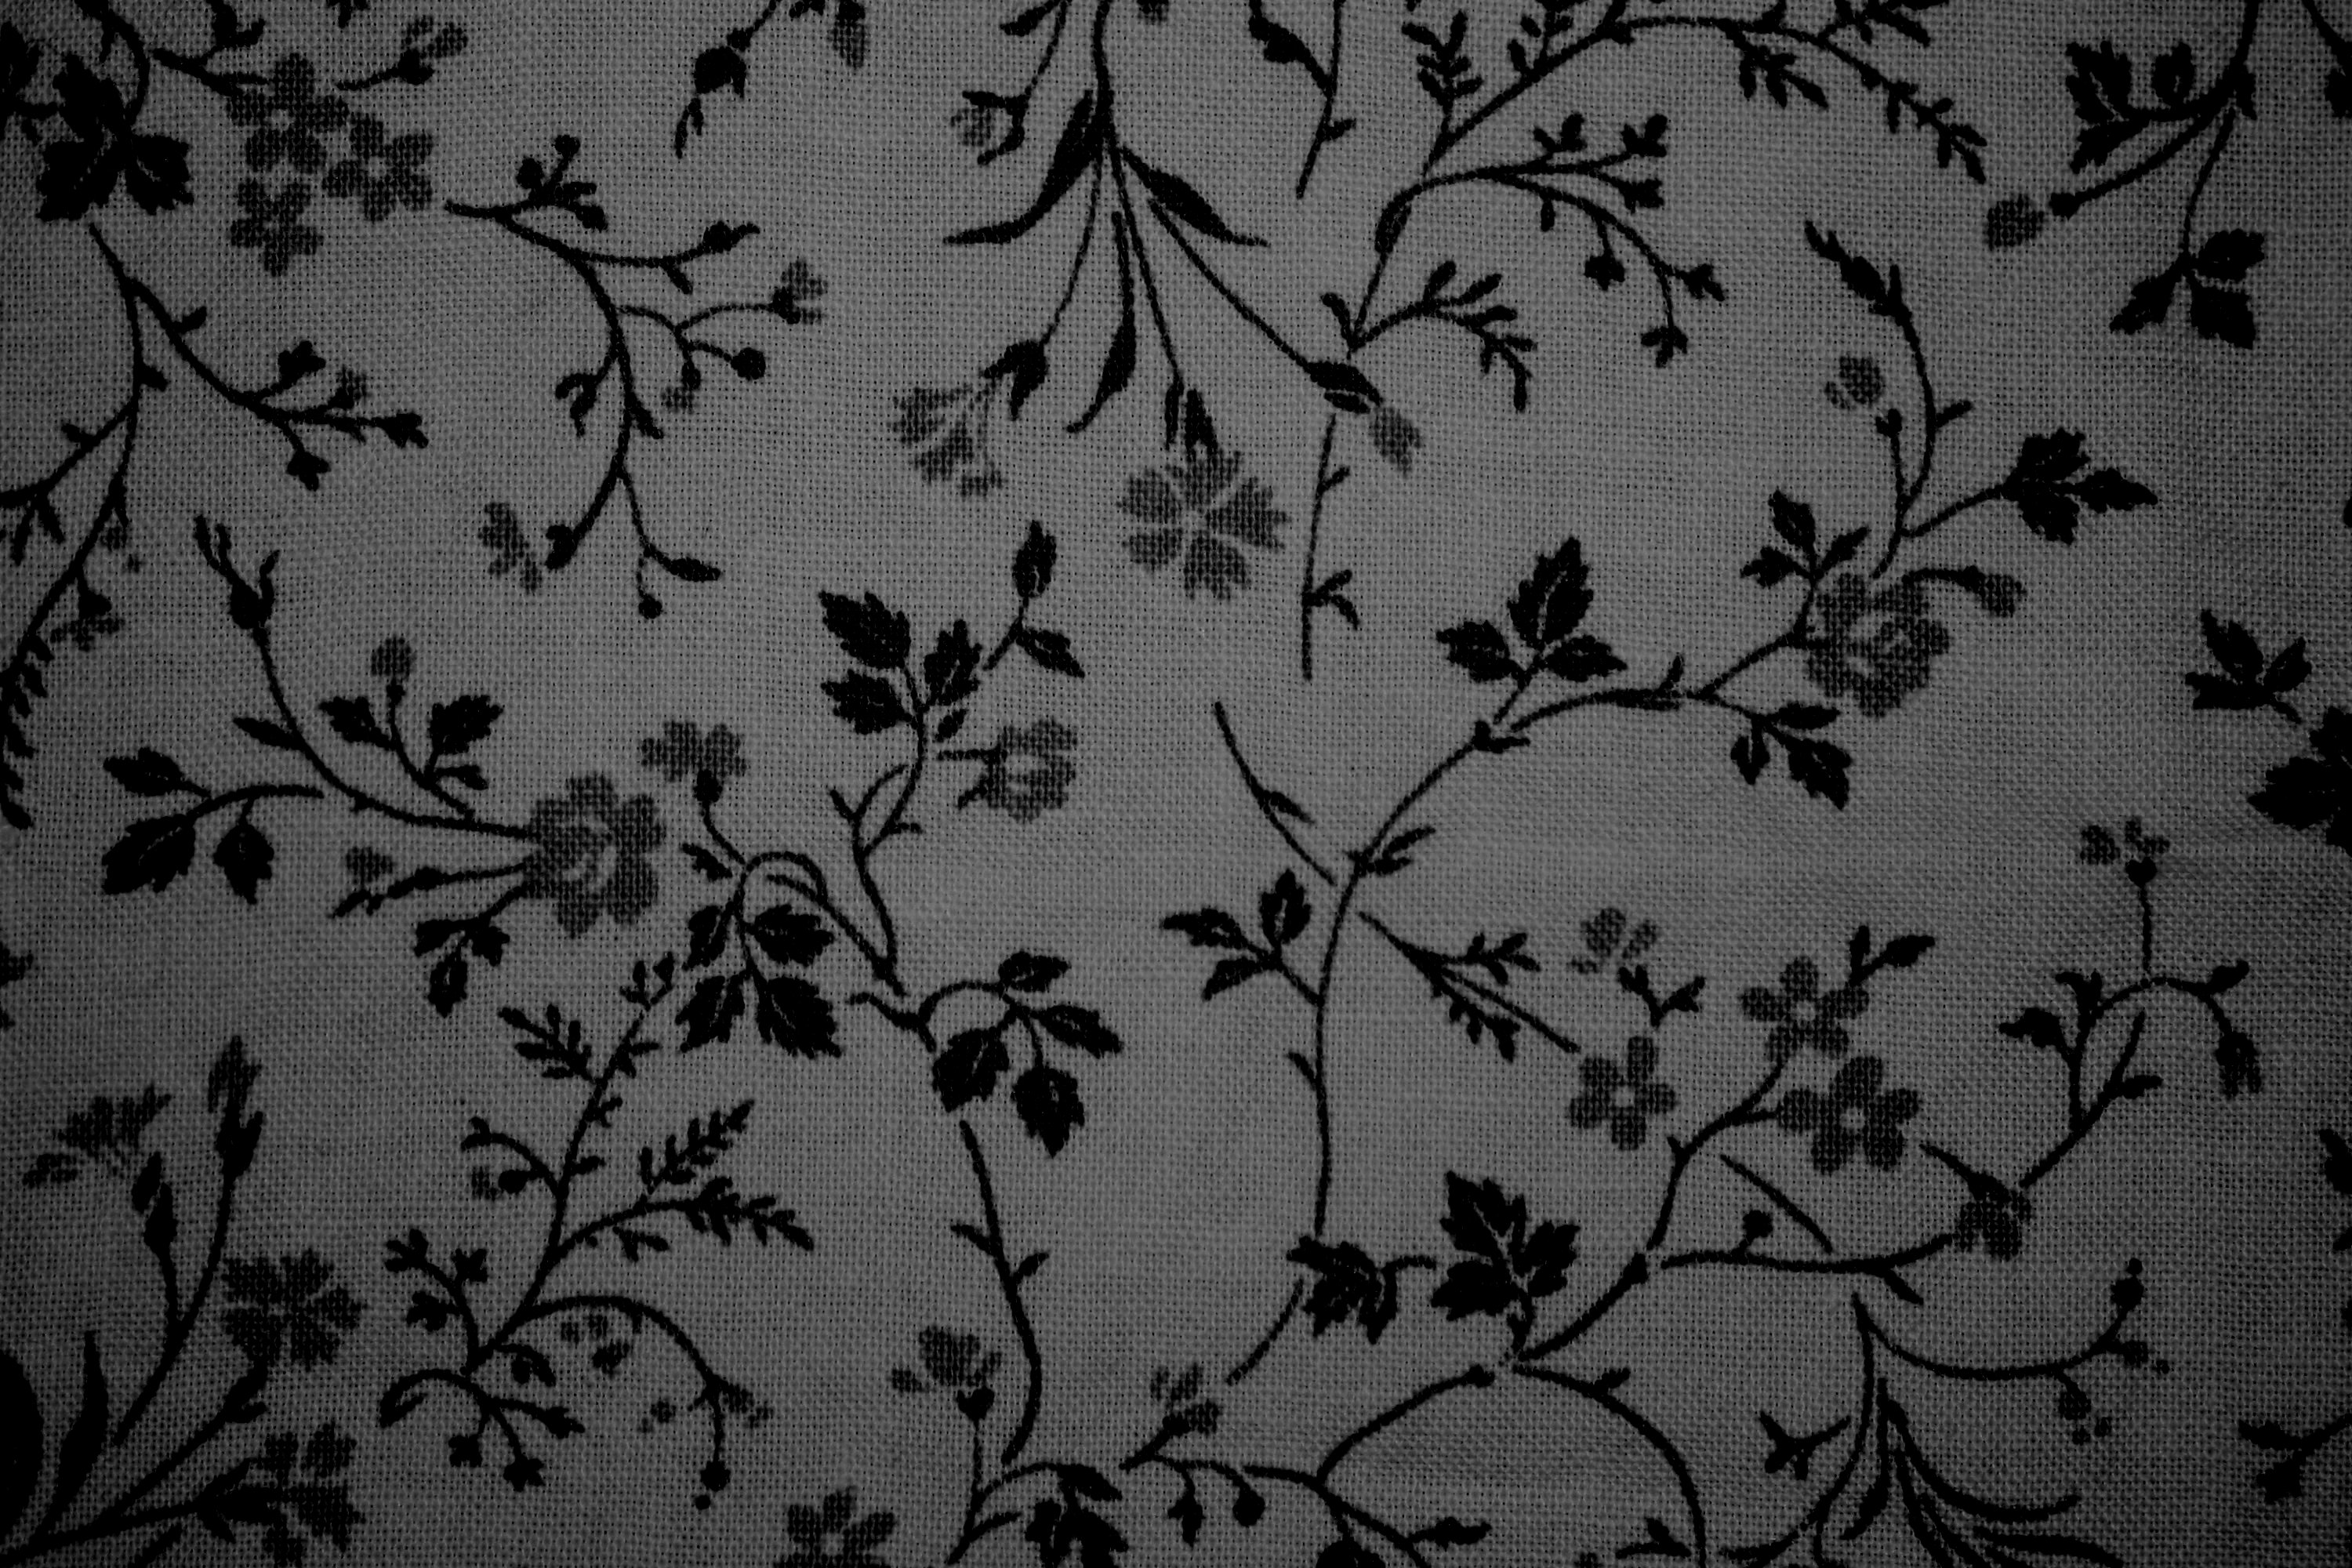 Black On Gray Floral Print Fabric Texture High Resolution Photo